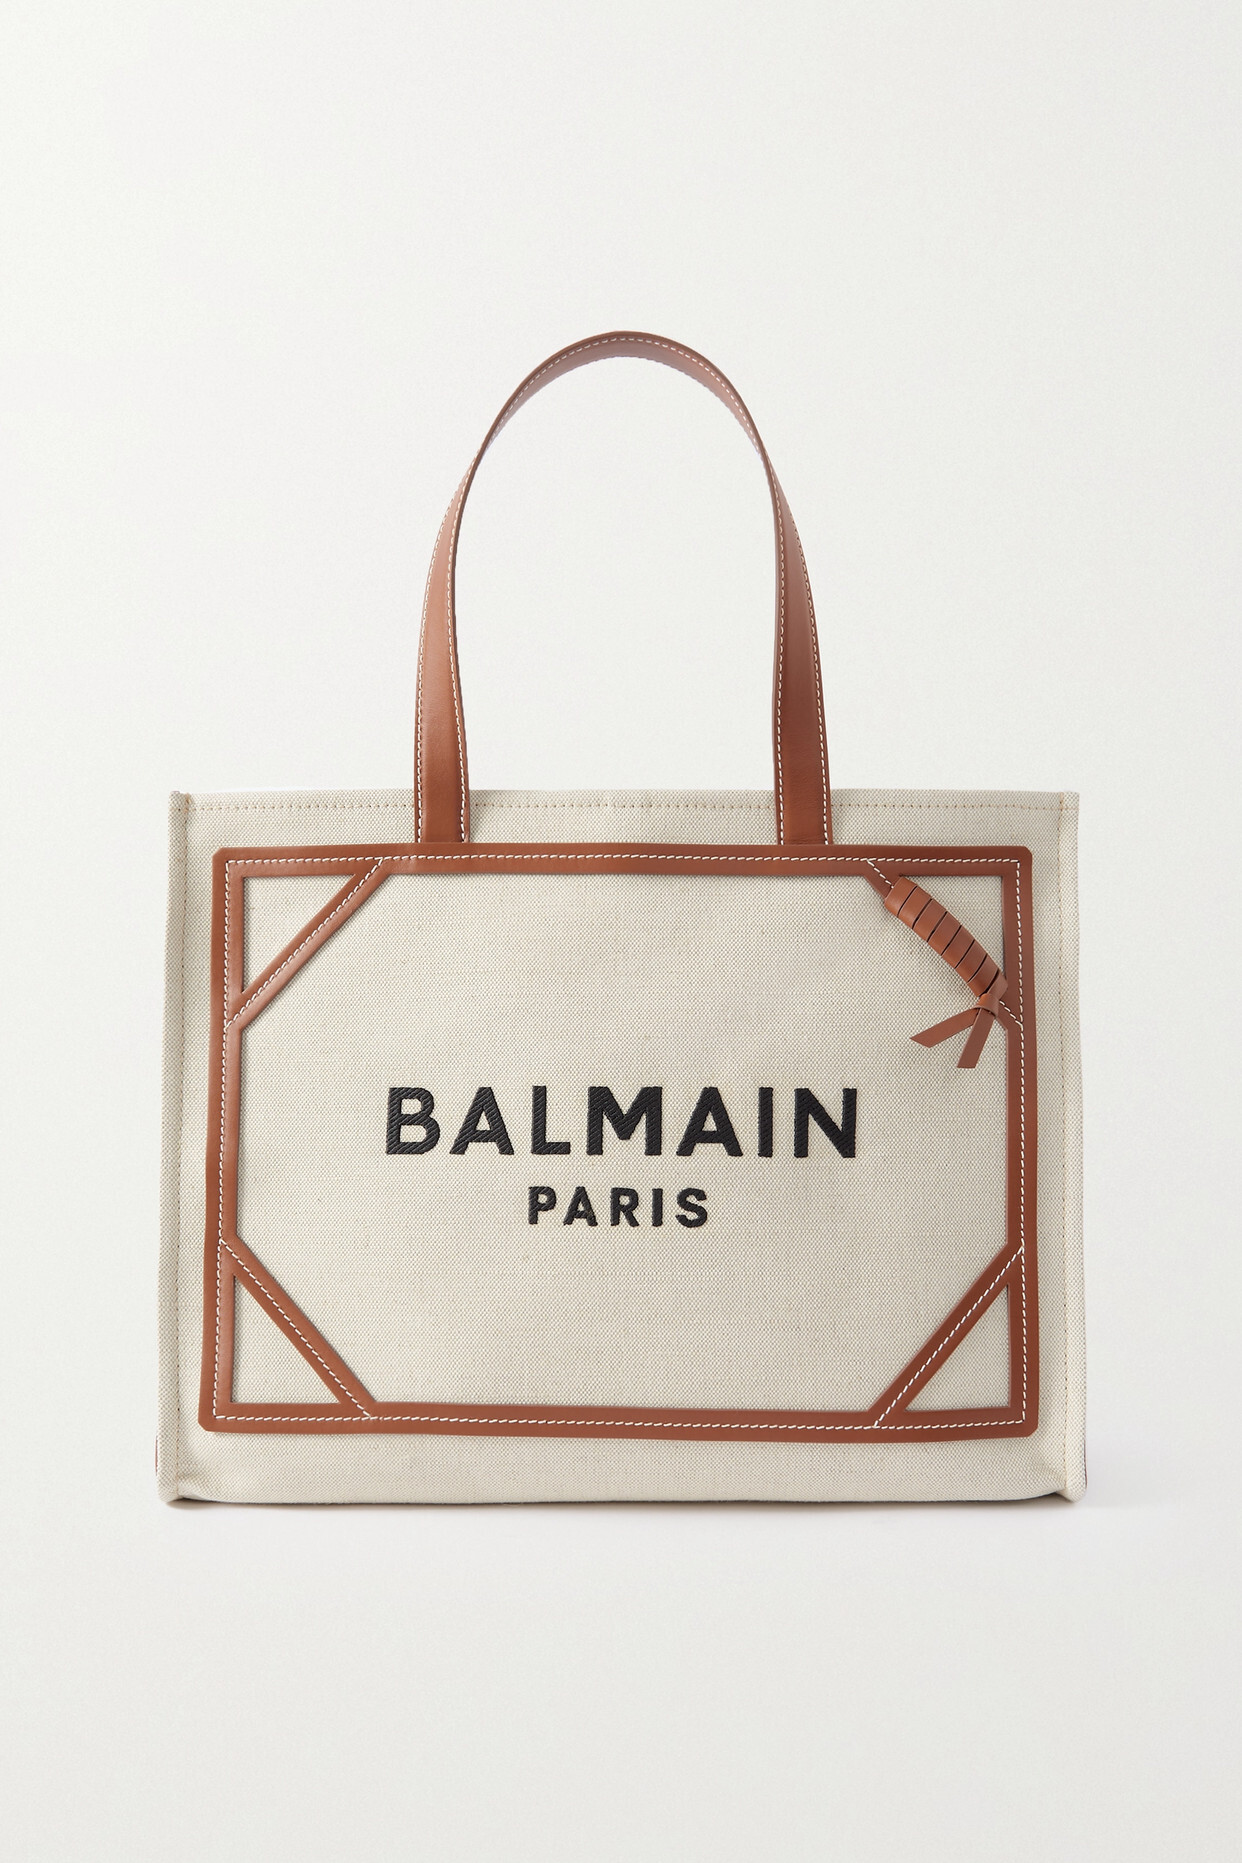 Balmain - B-army Medium Embroidered Leather-trimmed Canvas Tote - Neutrals